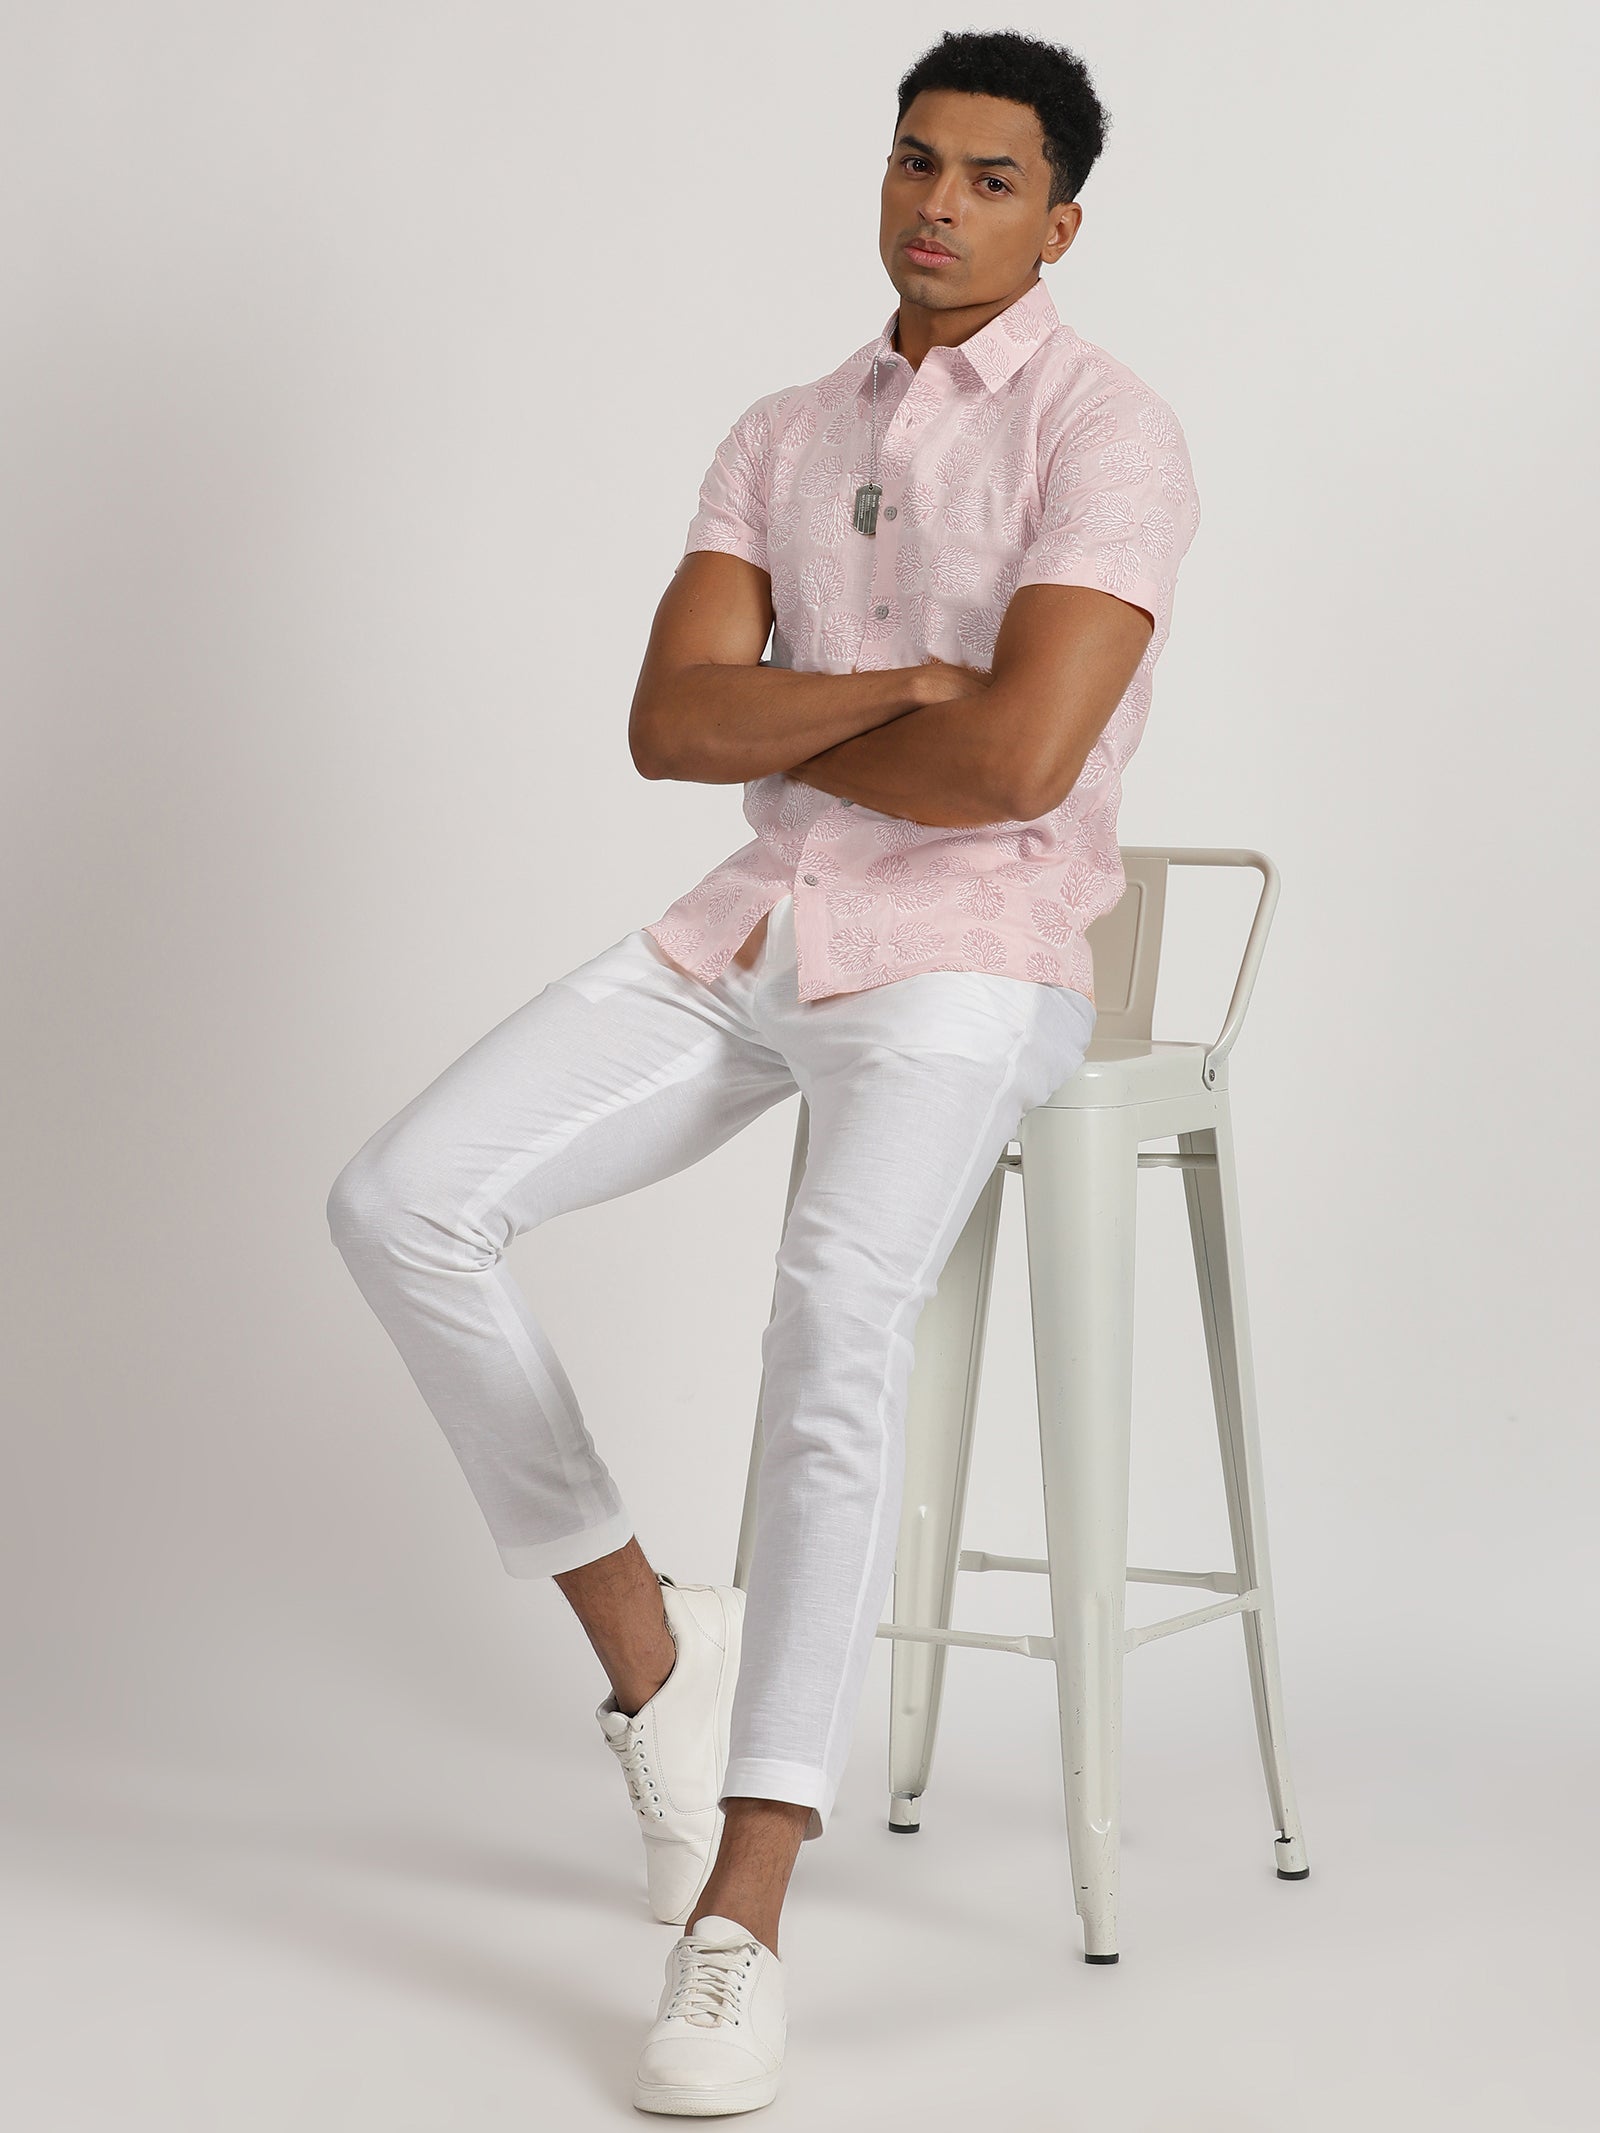 White Vertical Striped Long Sleeve Shirt with Pink Pants Outfits For Men (2  ideas & outfits) | Lookastic